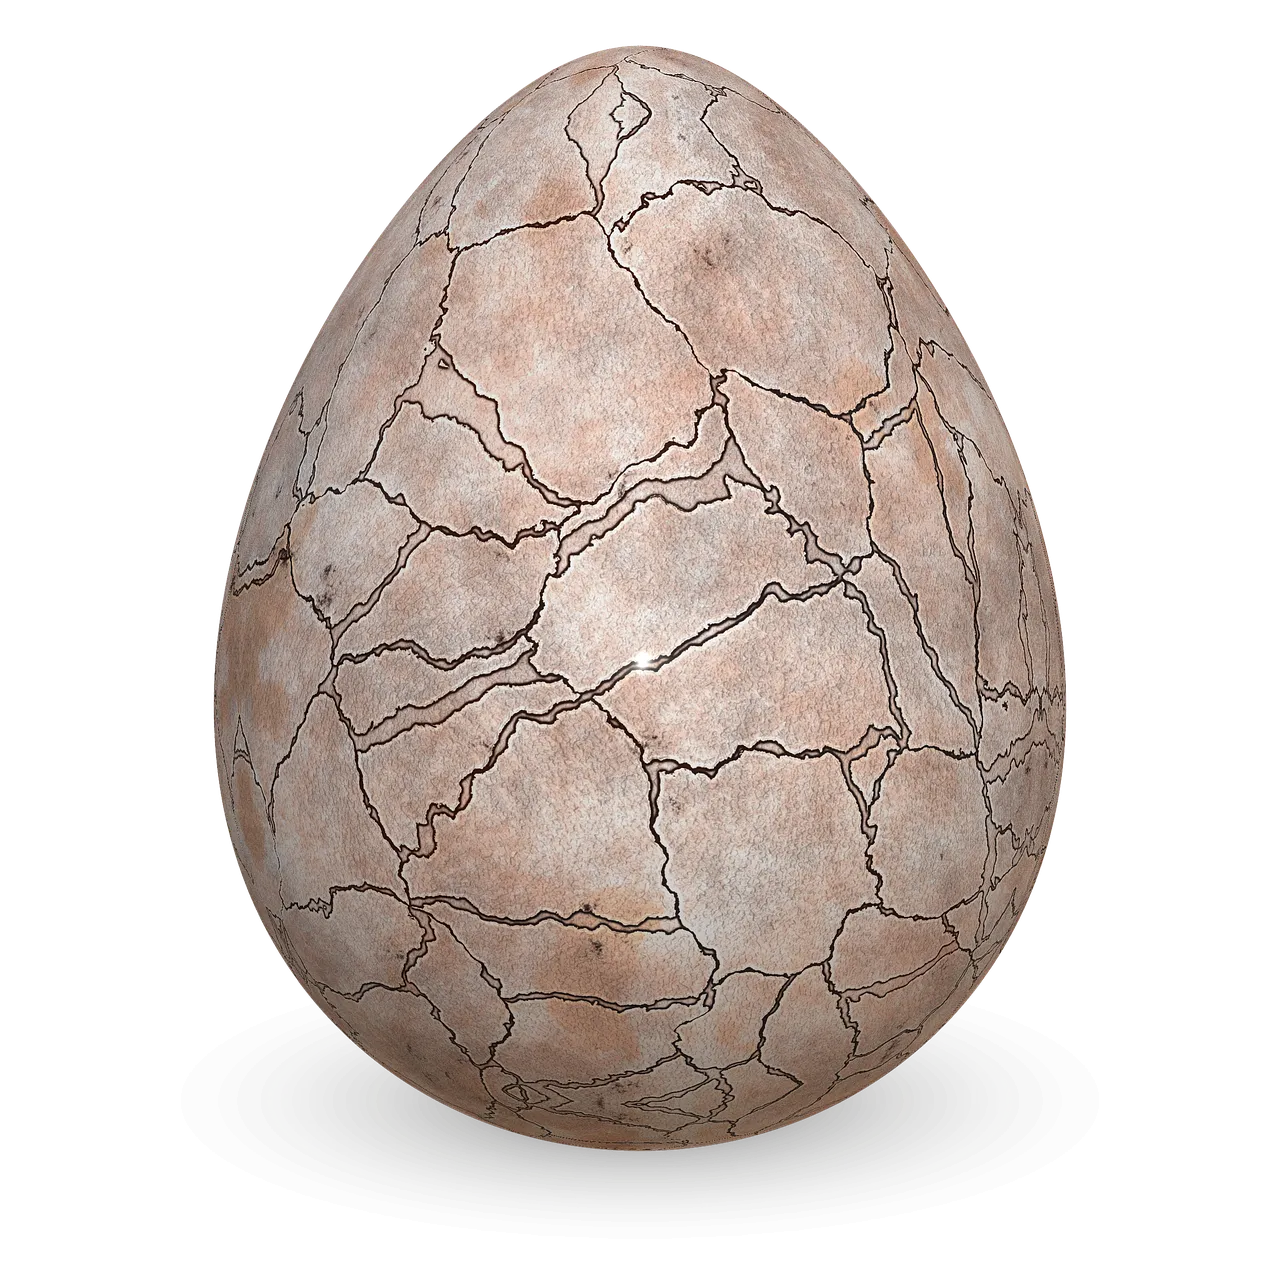 egg-4642443_1280.png